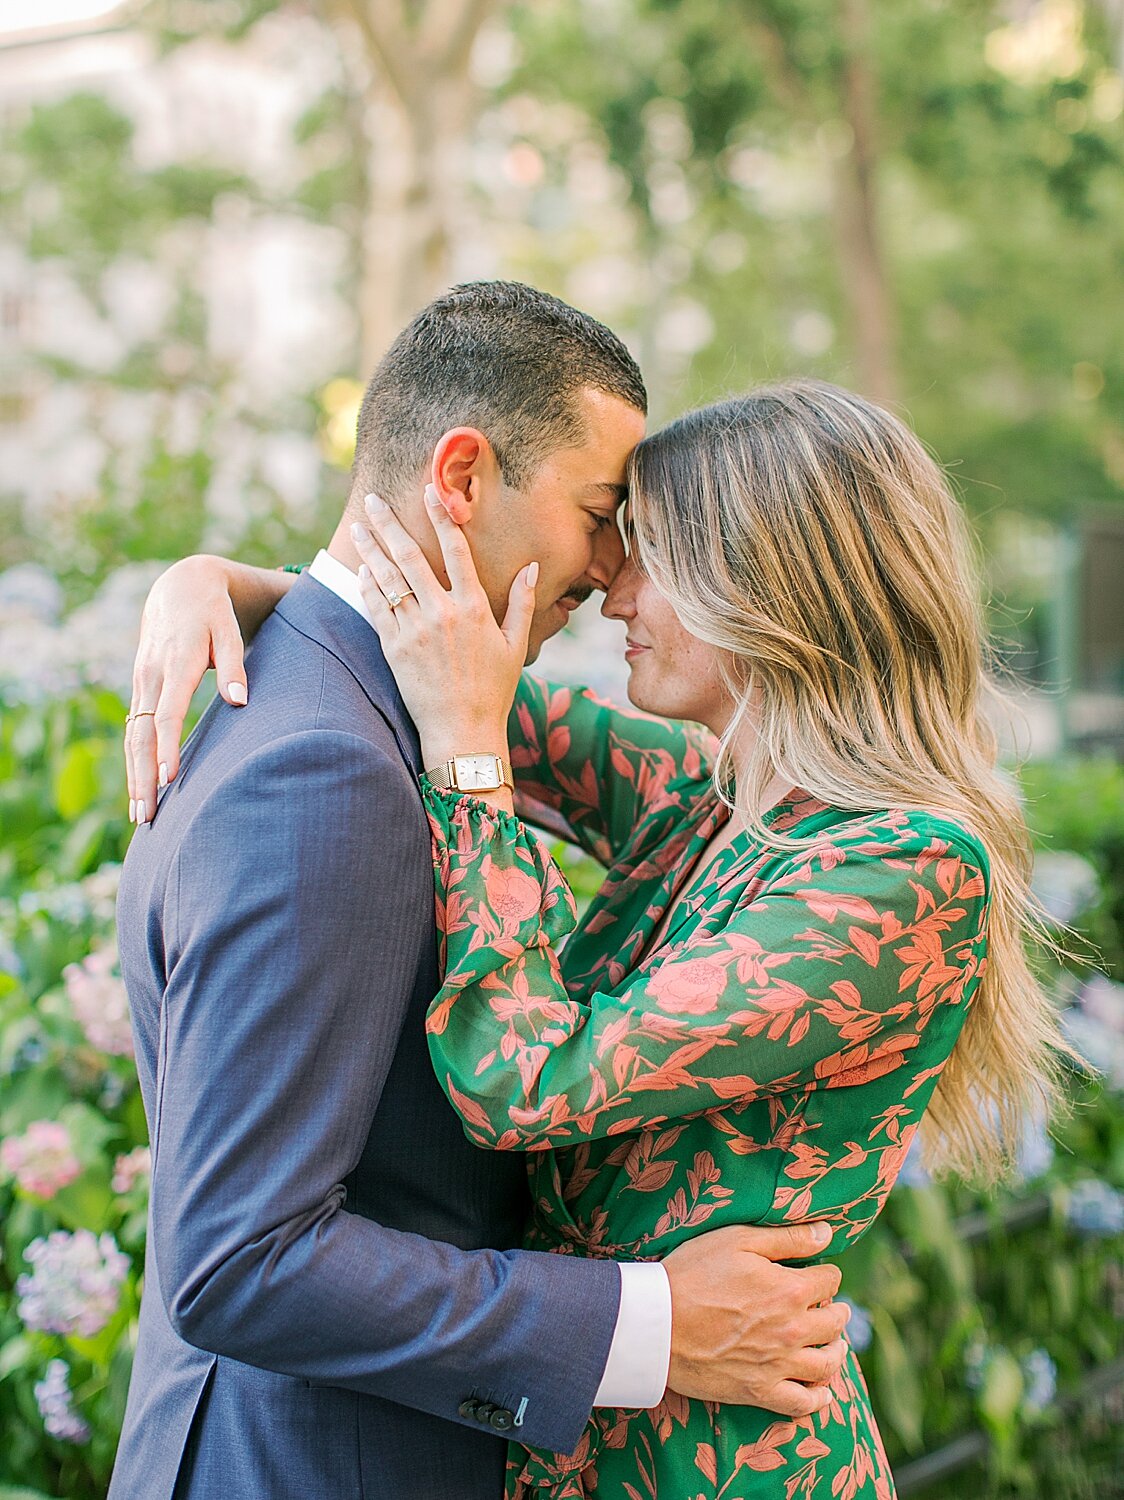 bride and groom pose in the city during engagement photos | Asher Gardner Photography | The Village engagement session